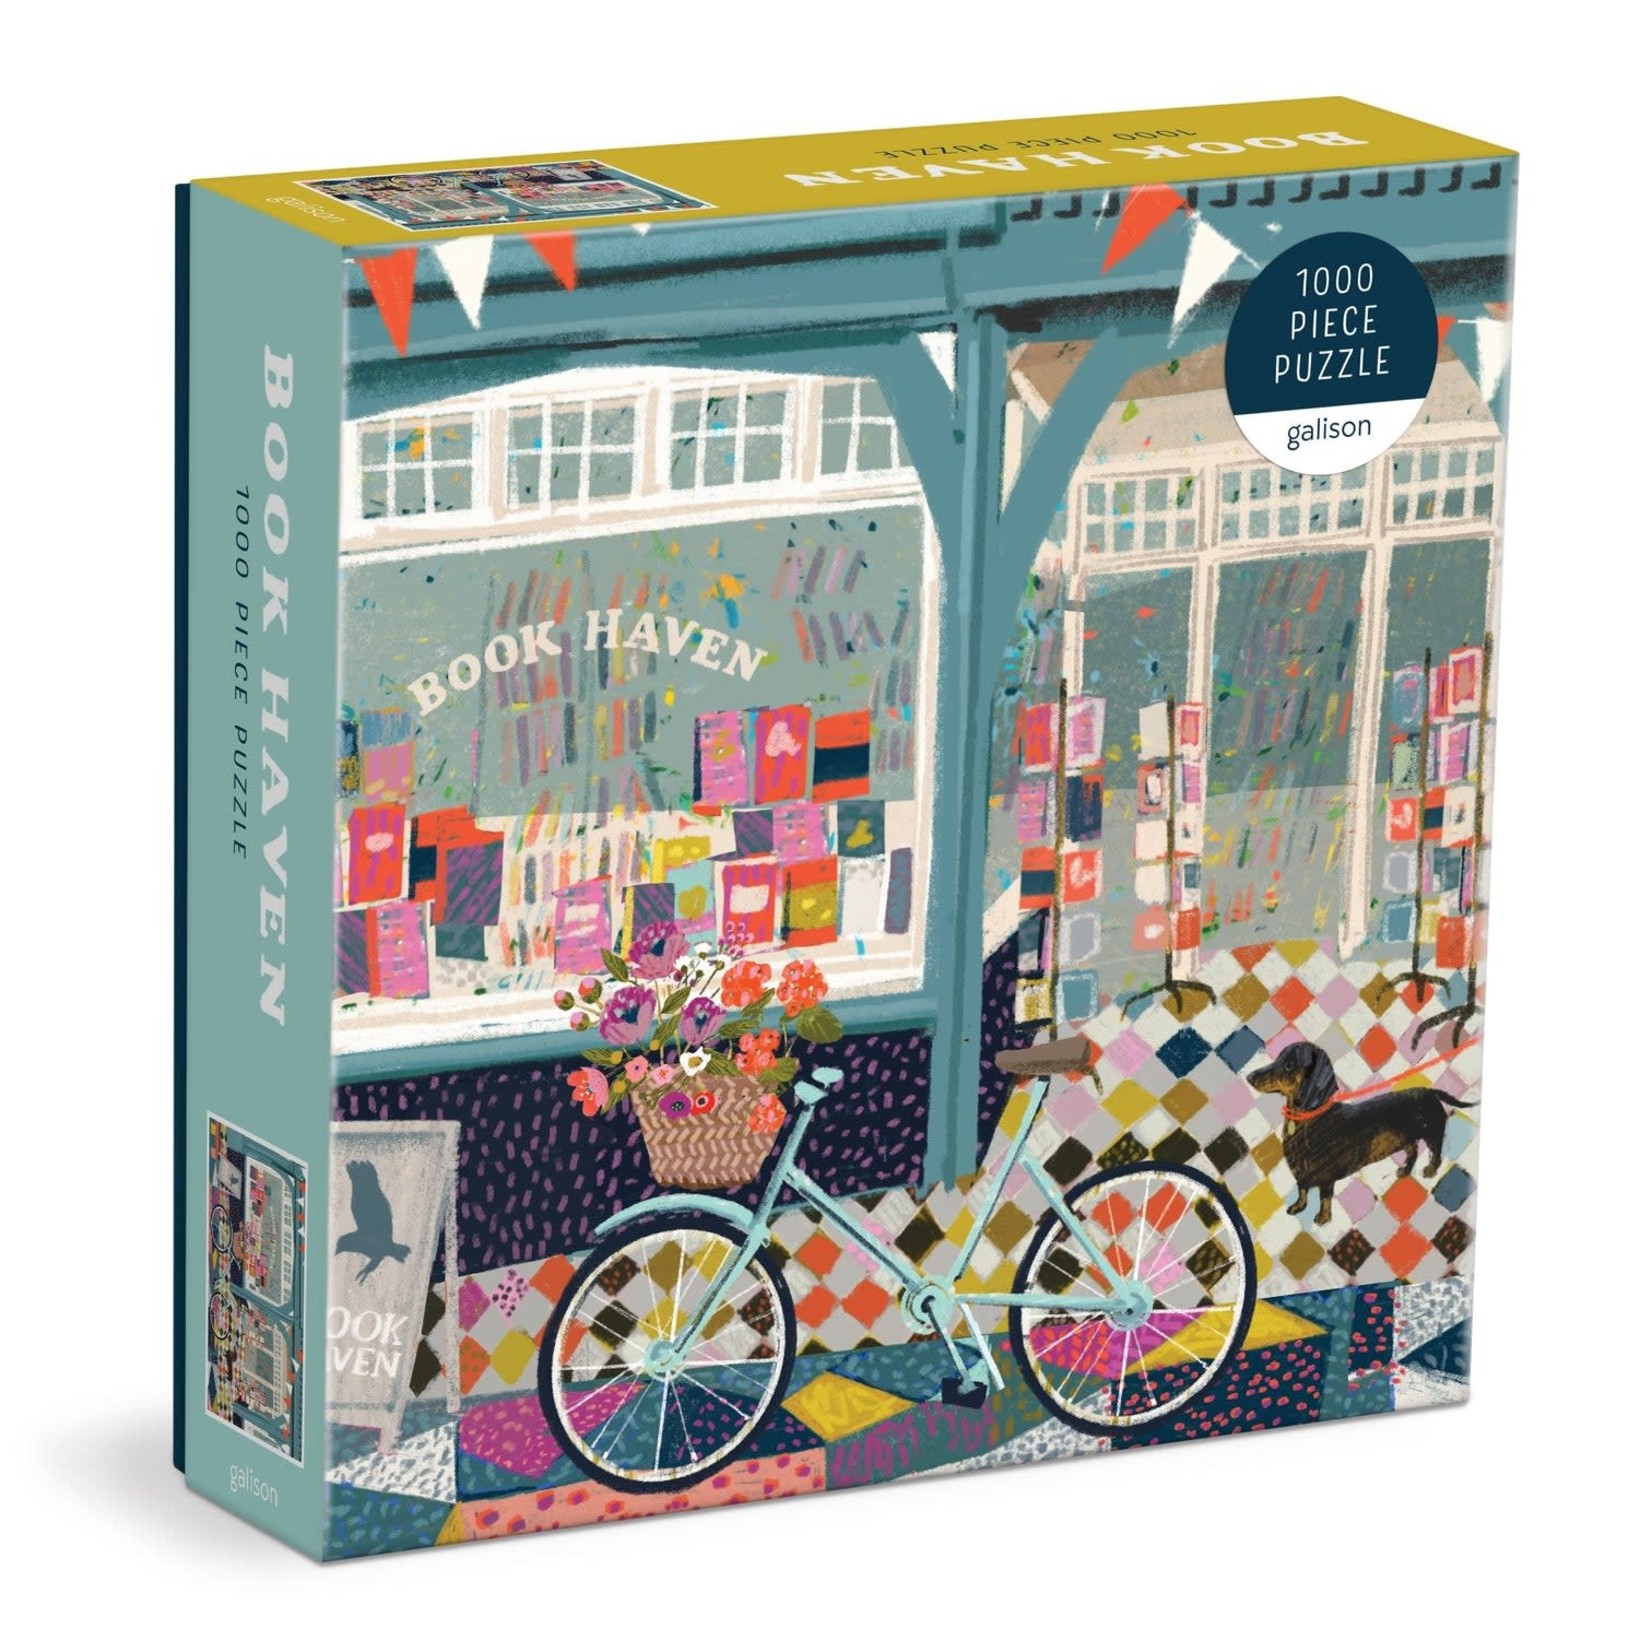 galison Book Haven 1000 Piece Jigsaw Puzzle